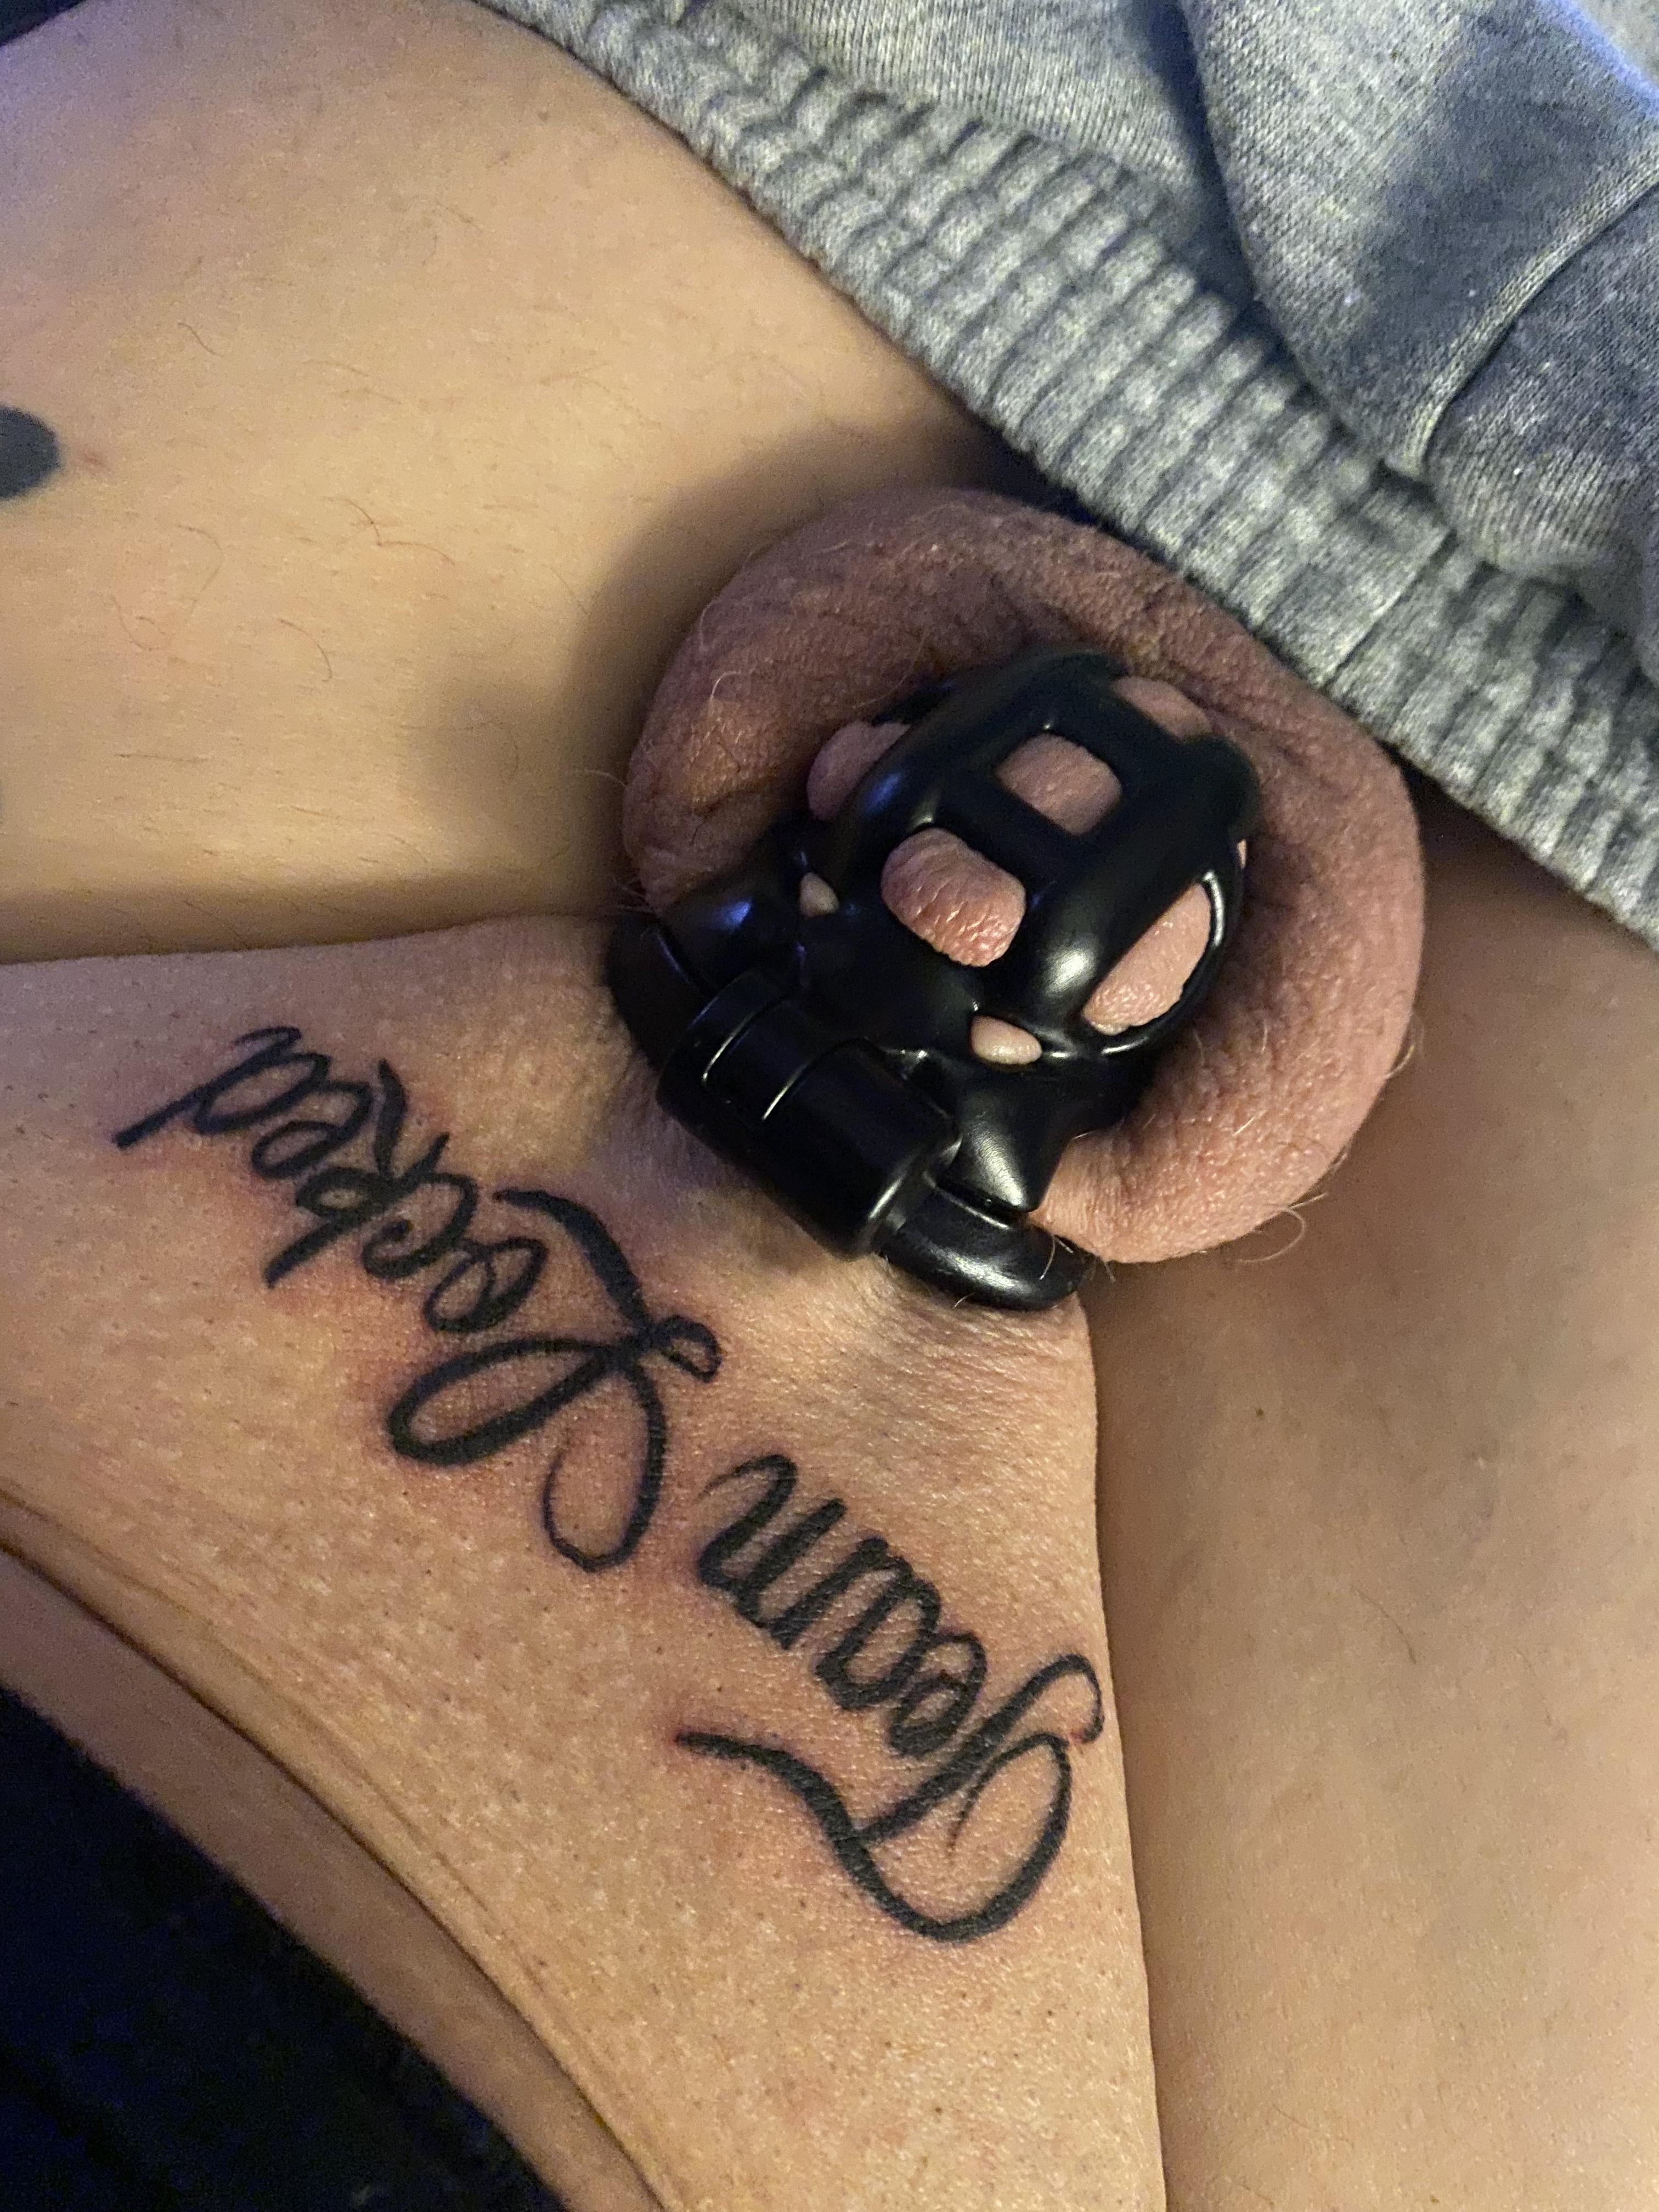 Locked Forever and tatted to prove it In a sealed